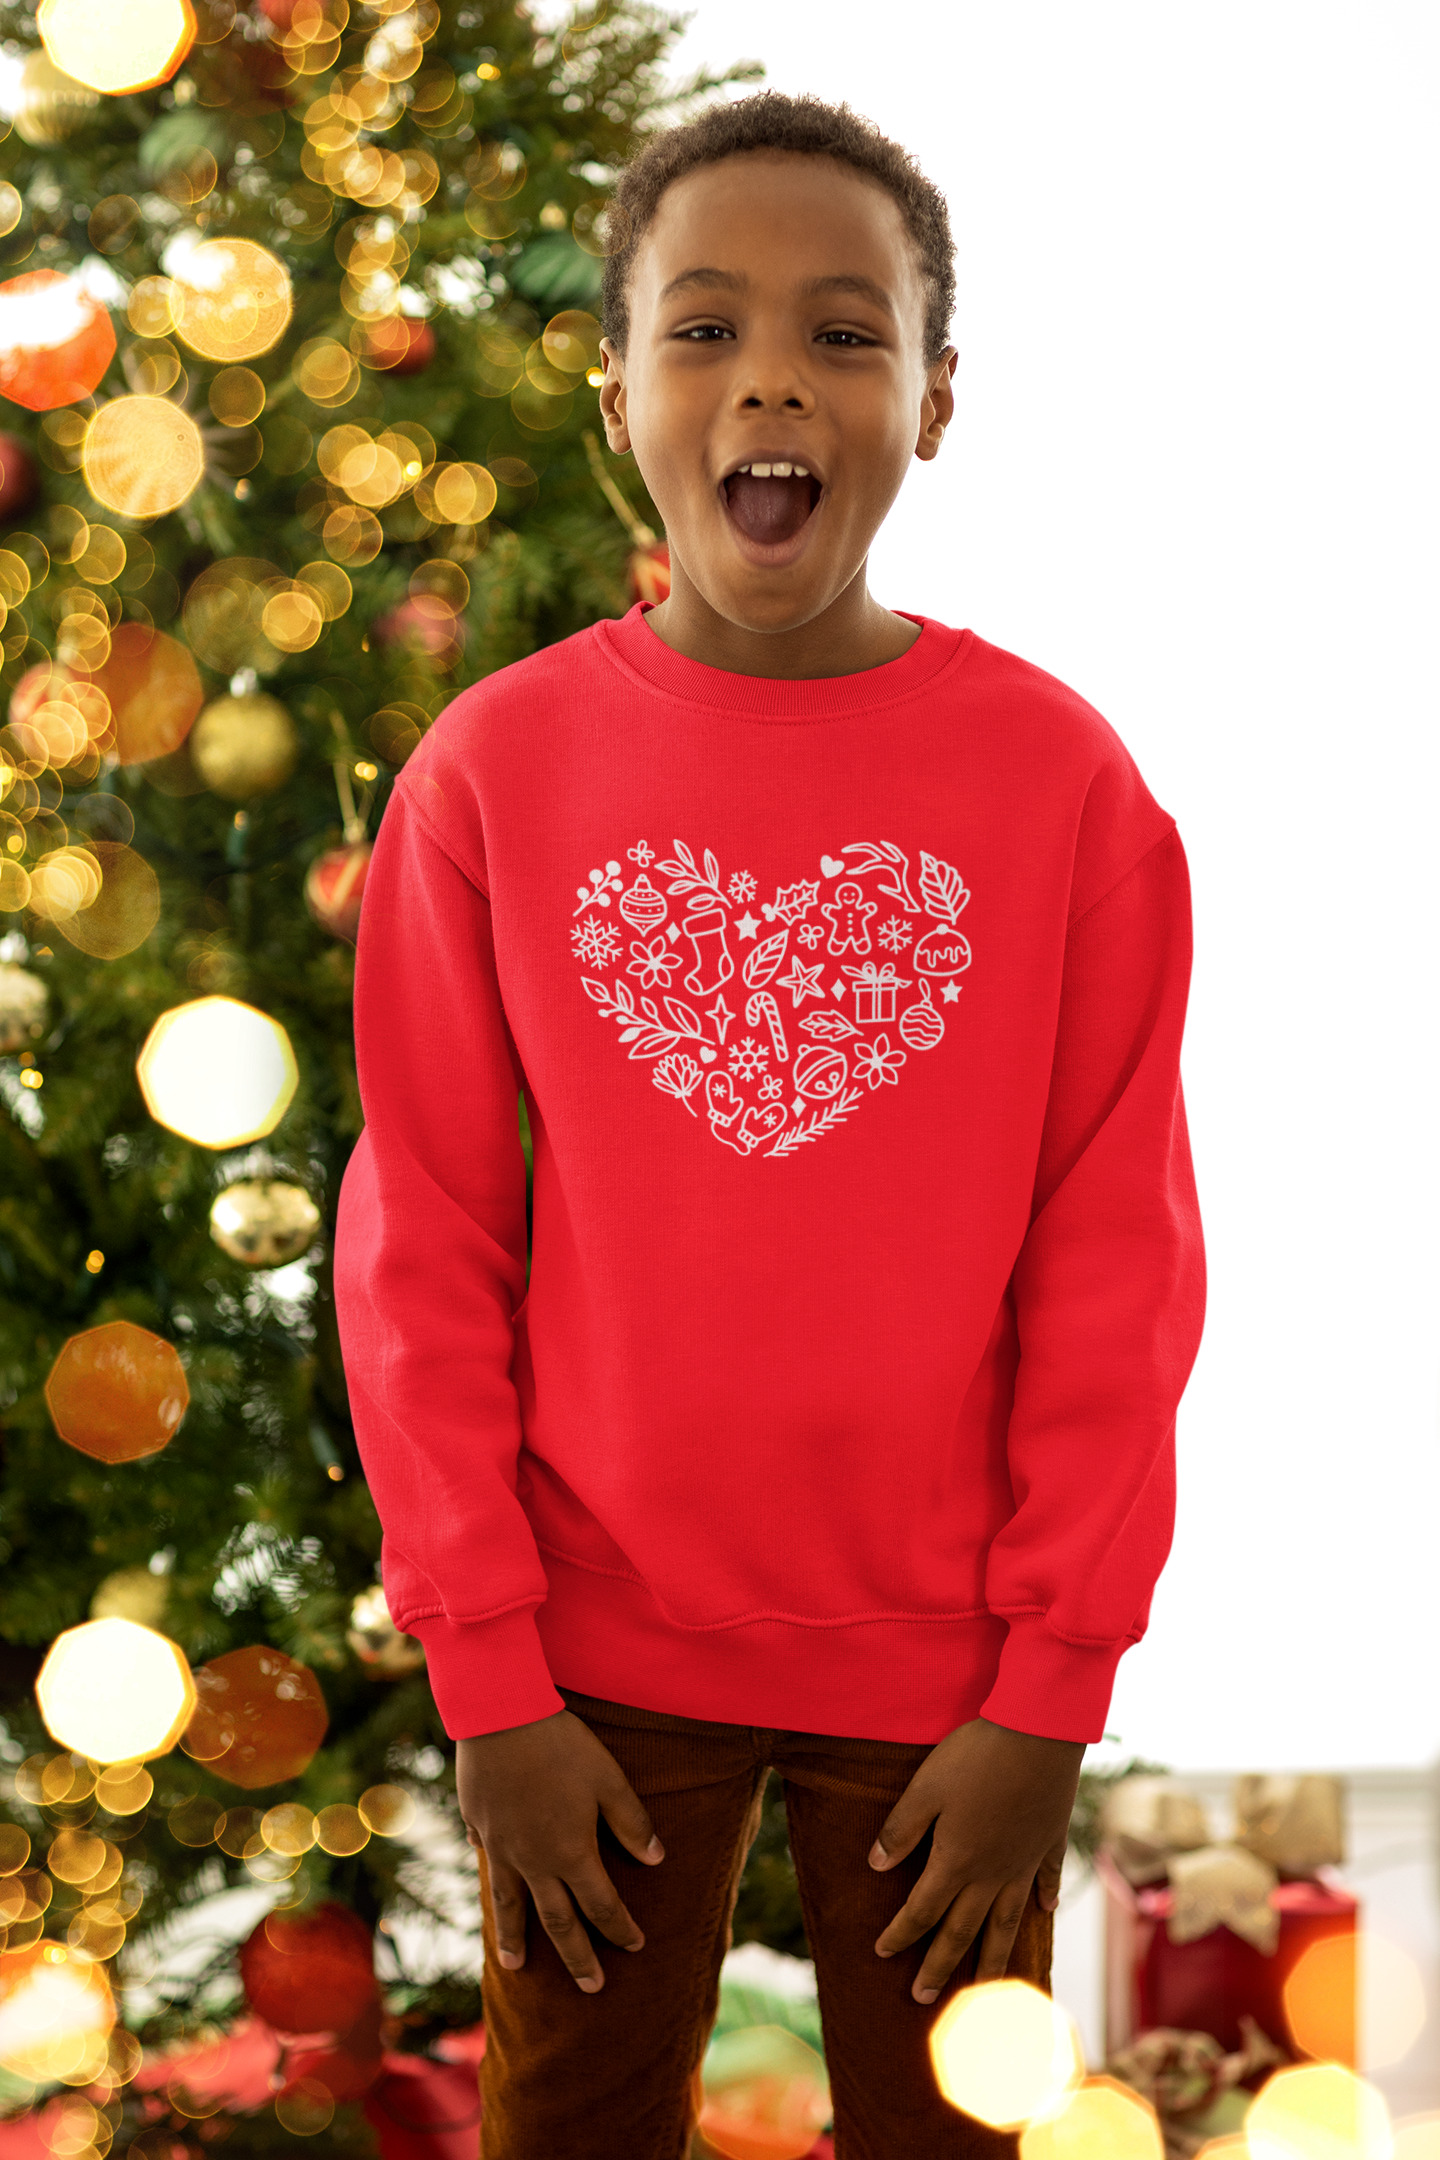 Everything to love for Christmas Sweatshirts, Kids